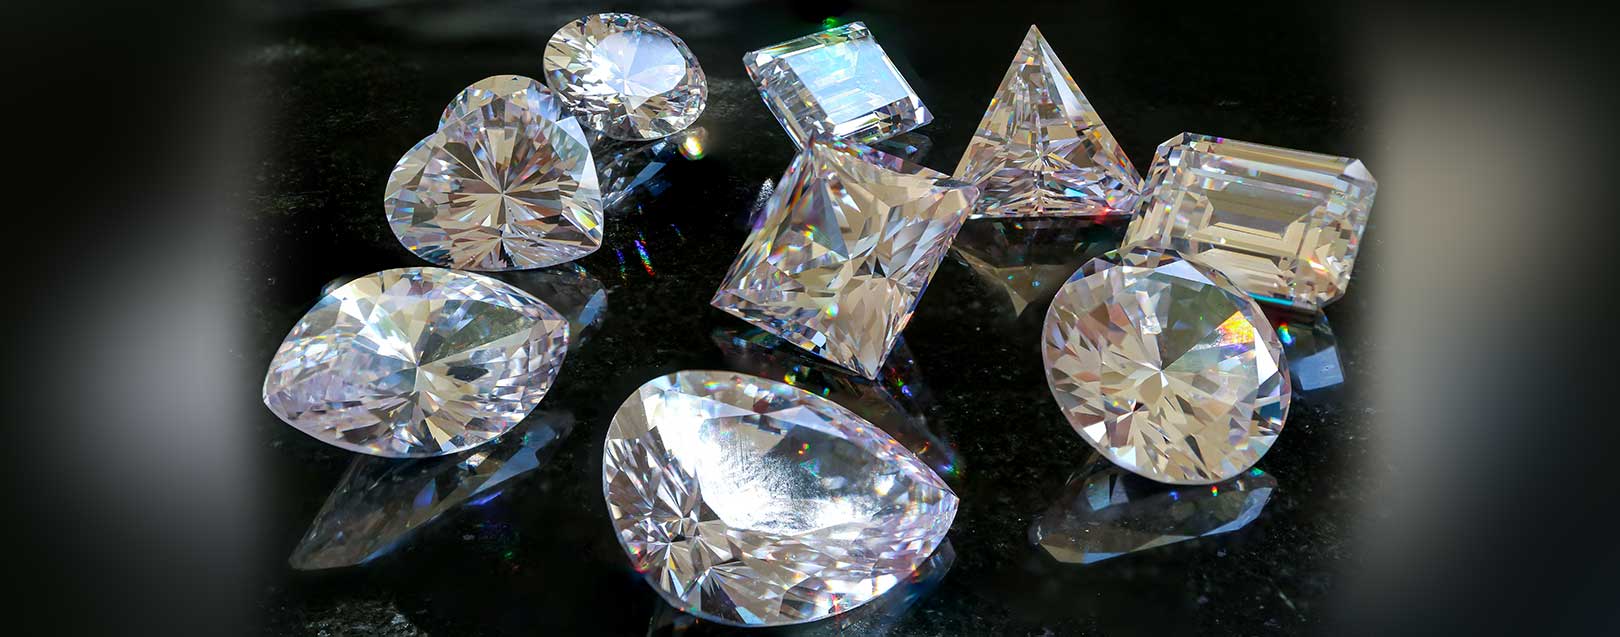 Customs exempts import duty on cut and polished diamonds to authorised agencies and offices